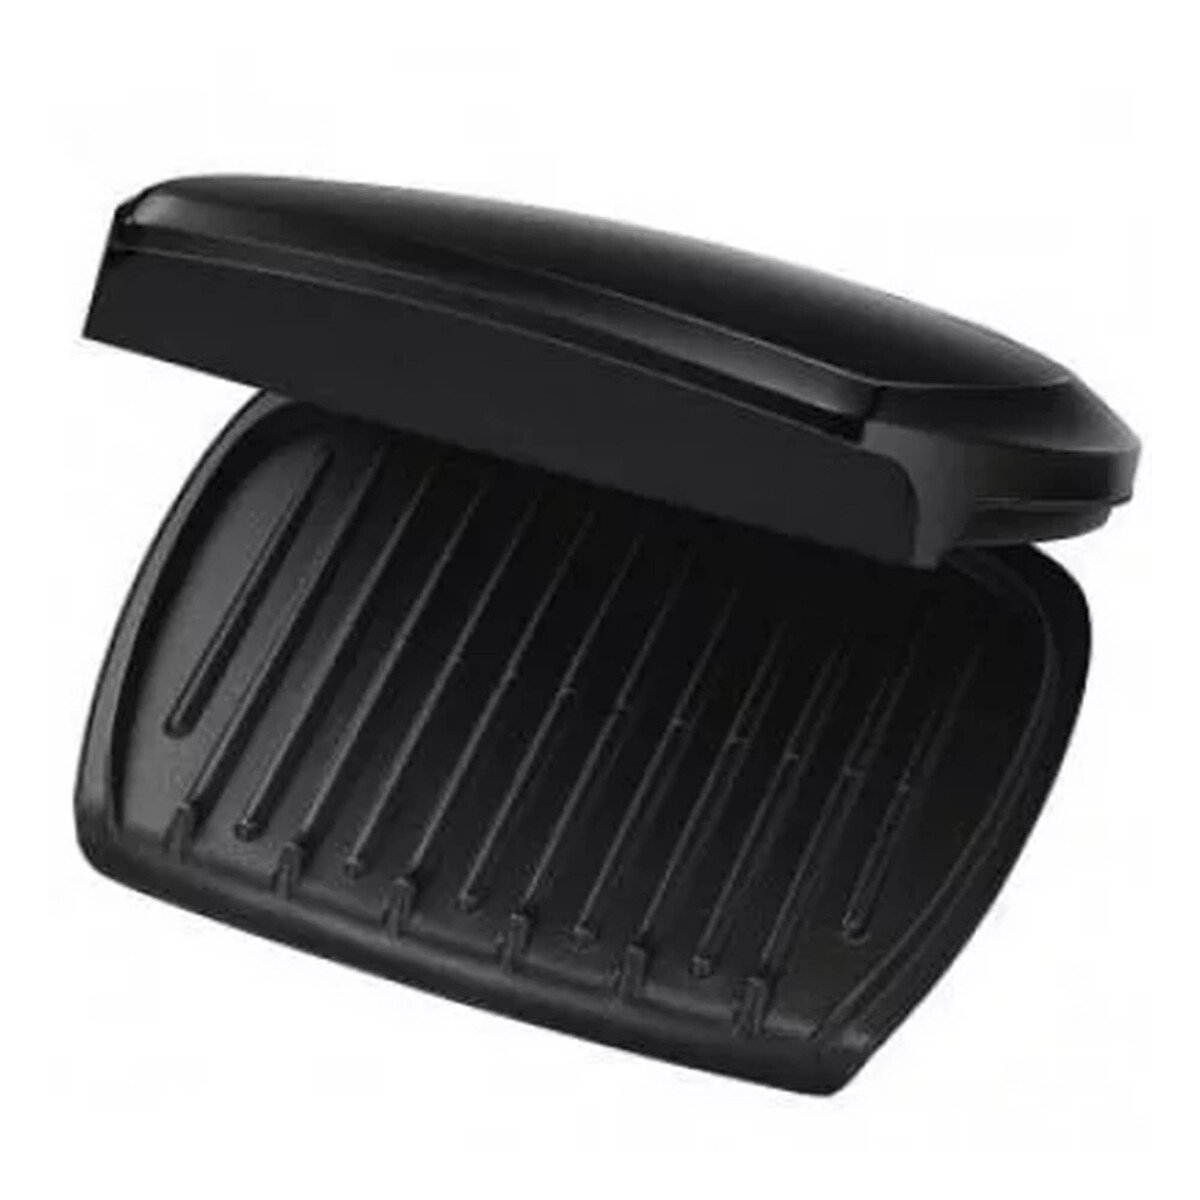 Russel Hobbs Family Grill 23420